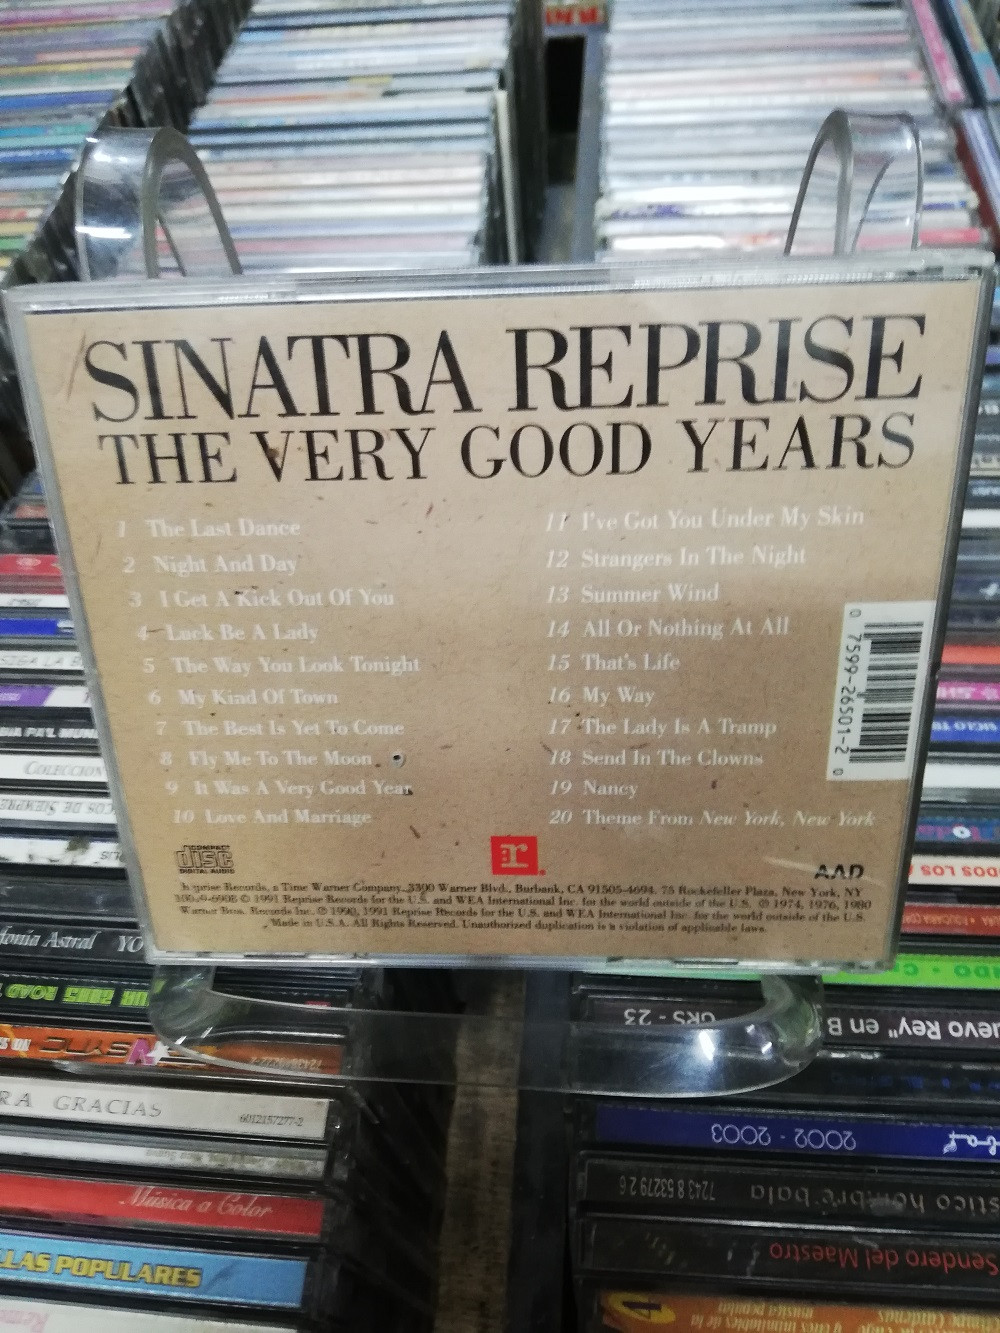 Imagen CD SINATRA REPRISE - THE VERY GOOD YEARS 2